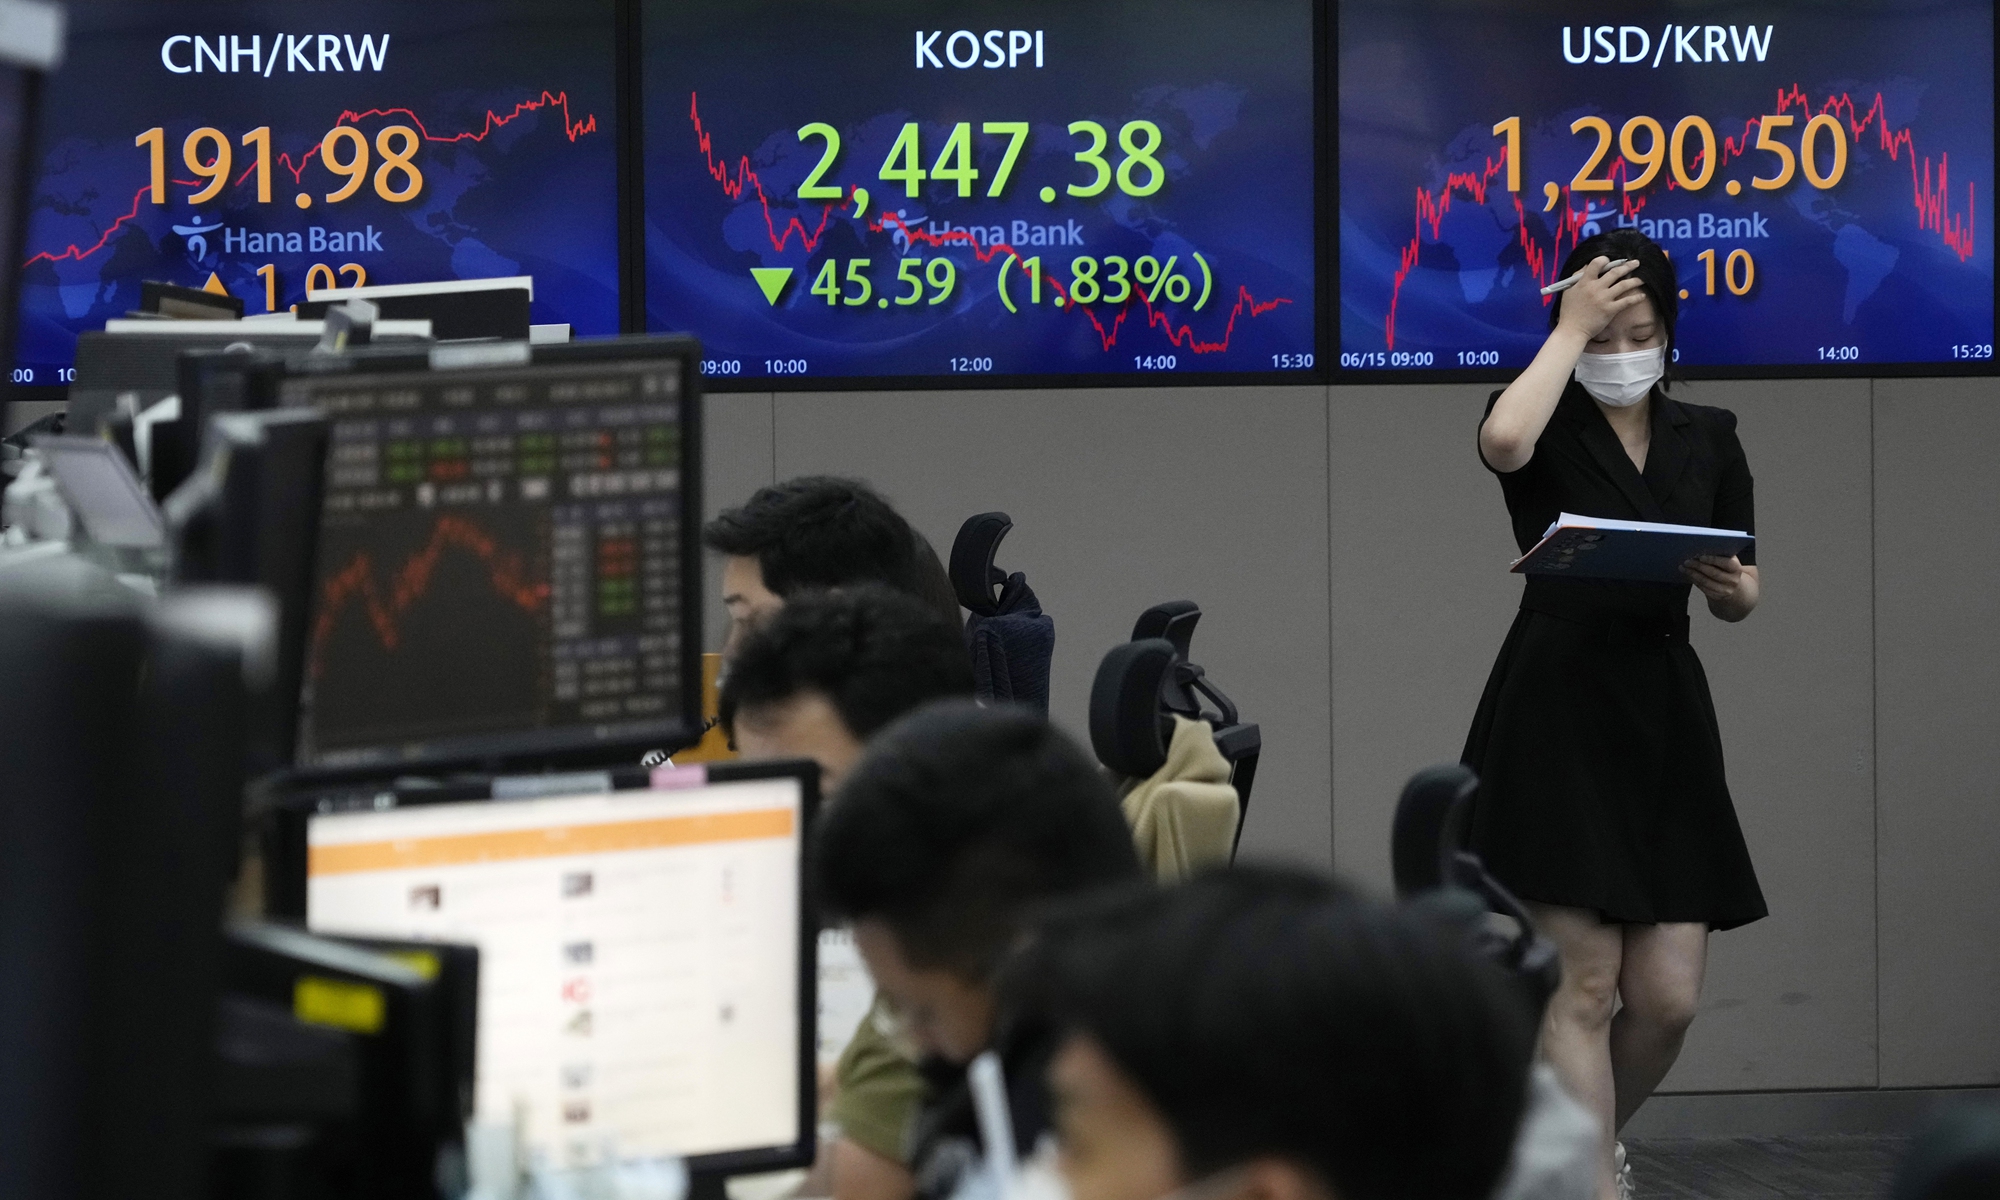 A currency trader passes by screens showing the Korea Composite Stock Price Index (KOSPI), center, and the exchange rate of South Korean won against the US dollar (right) at the foreign exchange dealing room of the KEB Hana Bank headquarters in Seoul on June 15, 2022. Asian stock markets were mixed on the day ahead of the Federal Reserve's announcement of how sharply it will raise interest rates to cool US inflation. Photo: VCG